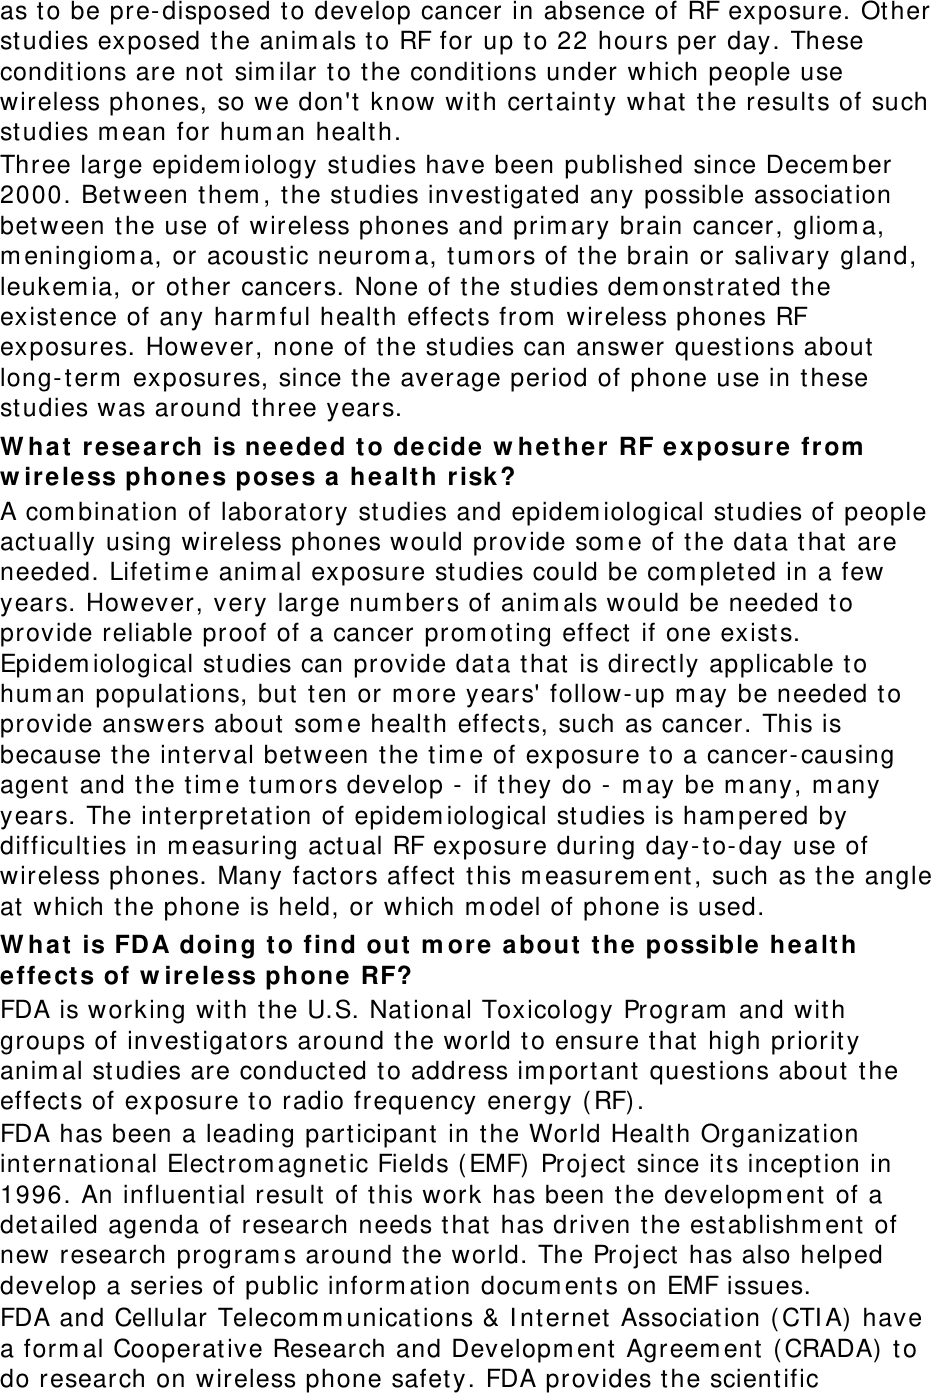 as to be pre-disposed t o develop cancer in absence of RF exposure. Ot her studies exposed the anim als to RF for up to 22 hours per day. These conditions are not sim ilar to the conditions under which people use wireless phones, so we don&apos;t  know wit h cert aint y what t he result s of such studies m ean for hum an health. Three large epidem iology st udies have been published since Decem ber 2000. Between them , the studies invest igated any possible associat ion bet ween t he use of wireless phones and prim ary brain cancer, gliom a, m eningiom a, or acoust ic neurom a, t um ors of the brain or salivary gland, leukem ia, or ot her cancers. None of t he studies dem onst rated t he existence of any harm ful health effects from  wireless phones RF exposures. However, none of t he st udies can answer questions about  long- t erm  exposures, since the average period of phone use in these studies was around three years. W ha t  r esearch is n eeded t o decide  w he t her  RF ex posure fr om  w ire less phones pose s a hea lt h risk ? A com bination of laborat ory st udies and epidem iological st udies of people act ually using wireless phones would provide som e of t he dat a t hat  are needed. Lifetim e anim al exposure studies could be com pleted in a few years. However, very large num bers of anim als would be needed to provide reliable proof of a cancer prom ot ing effect  if one exist s. Epidem iological studies can provide dat a that is direct ly applicable t o hum an populat ions, but t en or m ore years&apos; follow-up m ay be needed t o provide answers about  som e health effects, such as cancer. This is because the int erval bet ween the t im e of exposure to a cancer- causing agent and the tim e t um ors develop -  if they do -  m ay be m any, m any years. The int erpret ation of epidem iological st udies is ham pered by difficulties in m easuring act ual RF exposure during day- t o-day use of wireless phones. Many fact ors affect t his m easurem ent , such as the angle at  which t he phone is held, or which m odel of phone is used. W ha t  is FD A doing t o find out  m or e about  t he  possible  hea lt h effe ct s of w ireless phone RF? FDA is working with the U.S. National Toxicology Program  and with groups of investigat ors around t he world to ensure t hat  high priorit y anim al studies are conduct ed t o address im port ant  questions about t he effect s of exposure to radio frequency energy (RF). FDA has been a leading participant  in t he World Health Organizat ion int ernational Elect rom agnetic Fields ( EMF) Project  since its incept ion in 1996. An influent ial result of this work has been the developm ent  of a det ailed agenda of research needs t hat  has driven t he establishm ent  of new research program s around t he world. The Proj ect  has also helped develop a series of public inform ation docum ents on EMF issues. FDA and Cellular Telecom m unications &amp; I nt ernet  Associat ion ( CTI A)  have a form al Cooperat ive Research and Developm ent  Agreem ent  ( CRADA)  to do research on wireless phone safet y. FDA provides t he scientific 